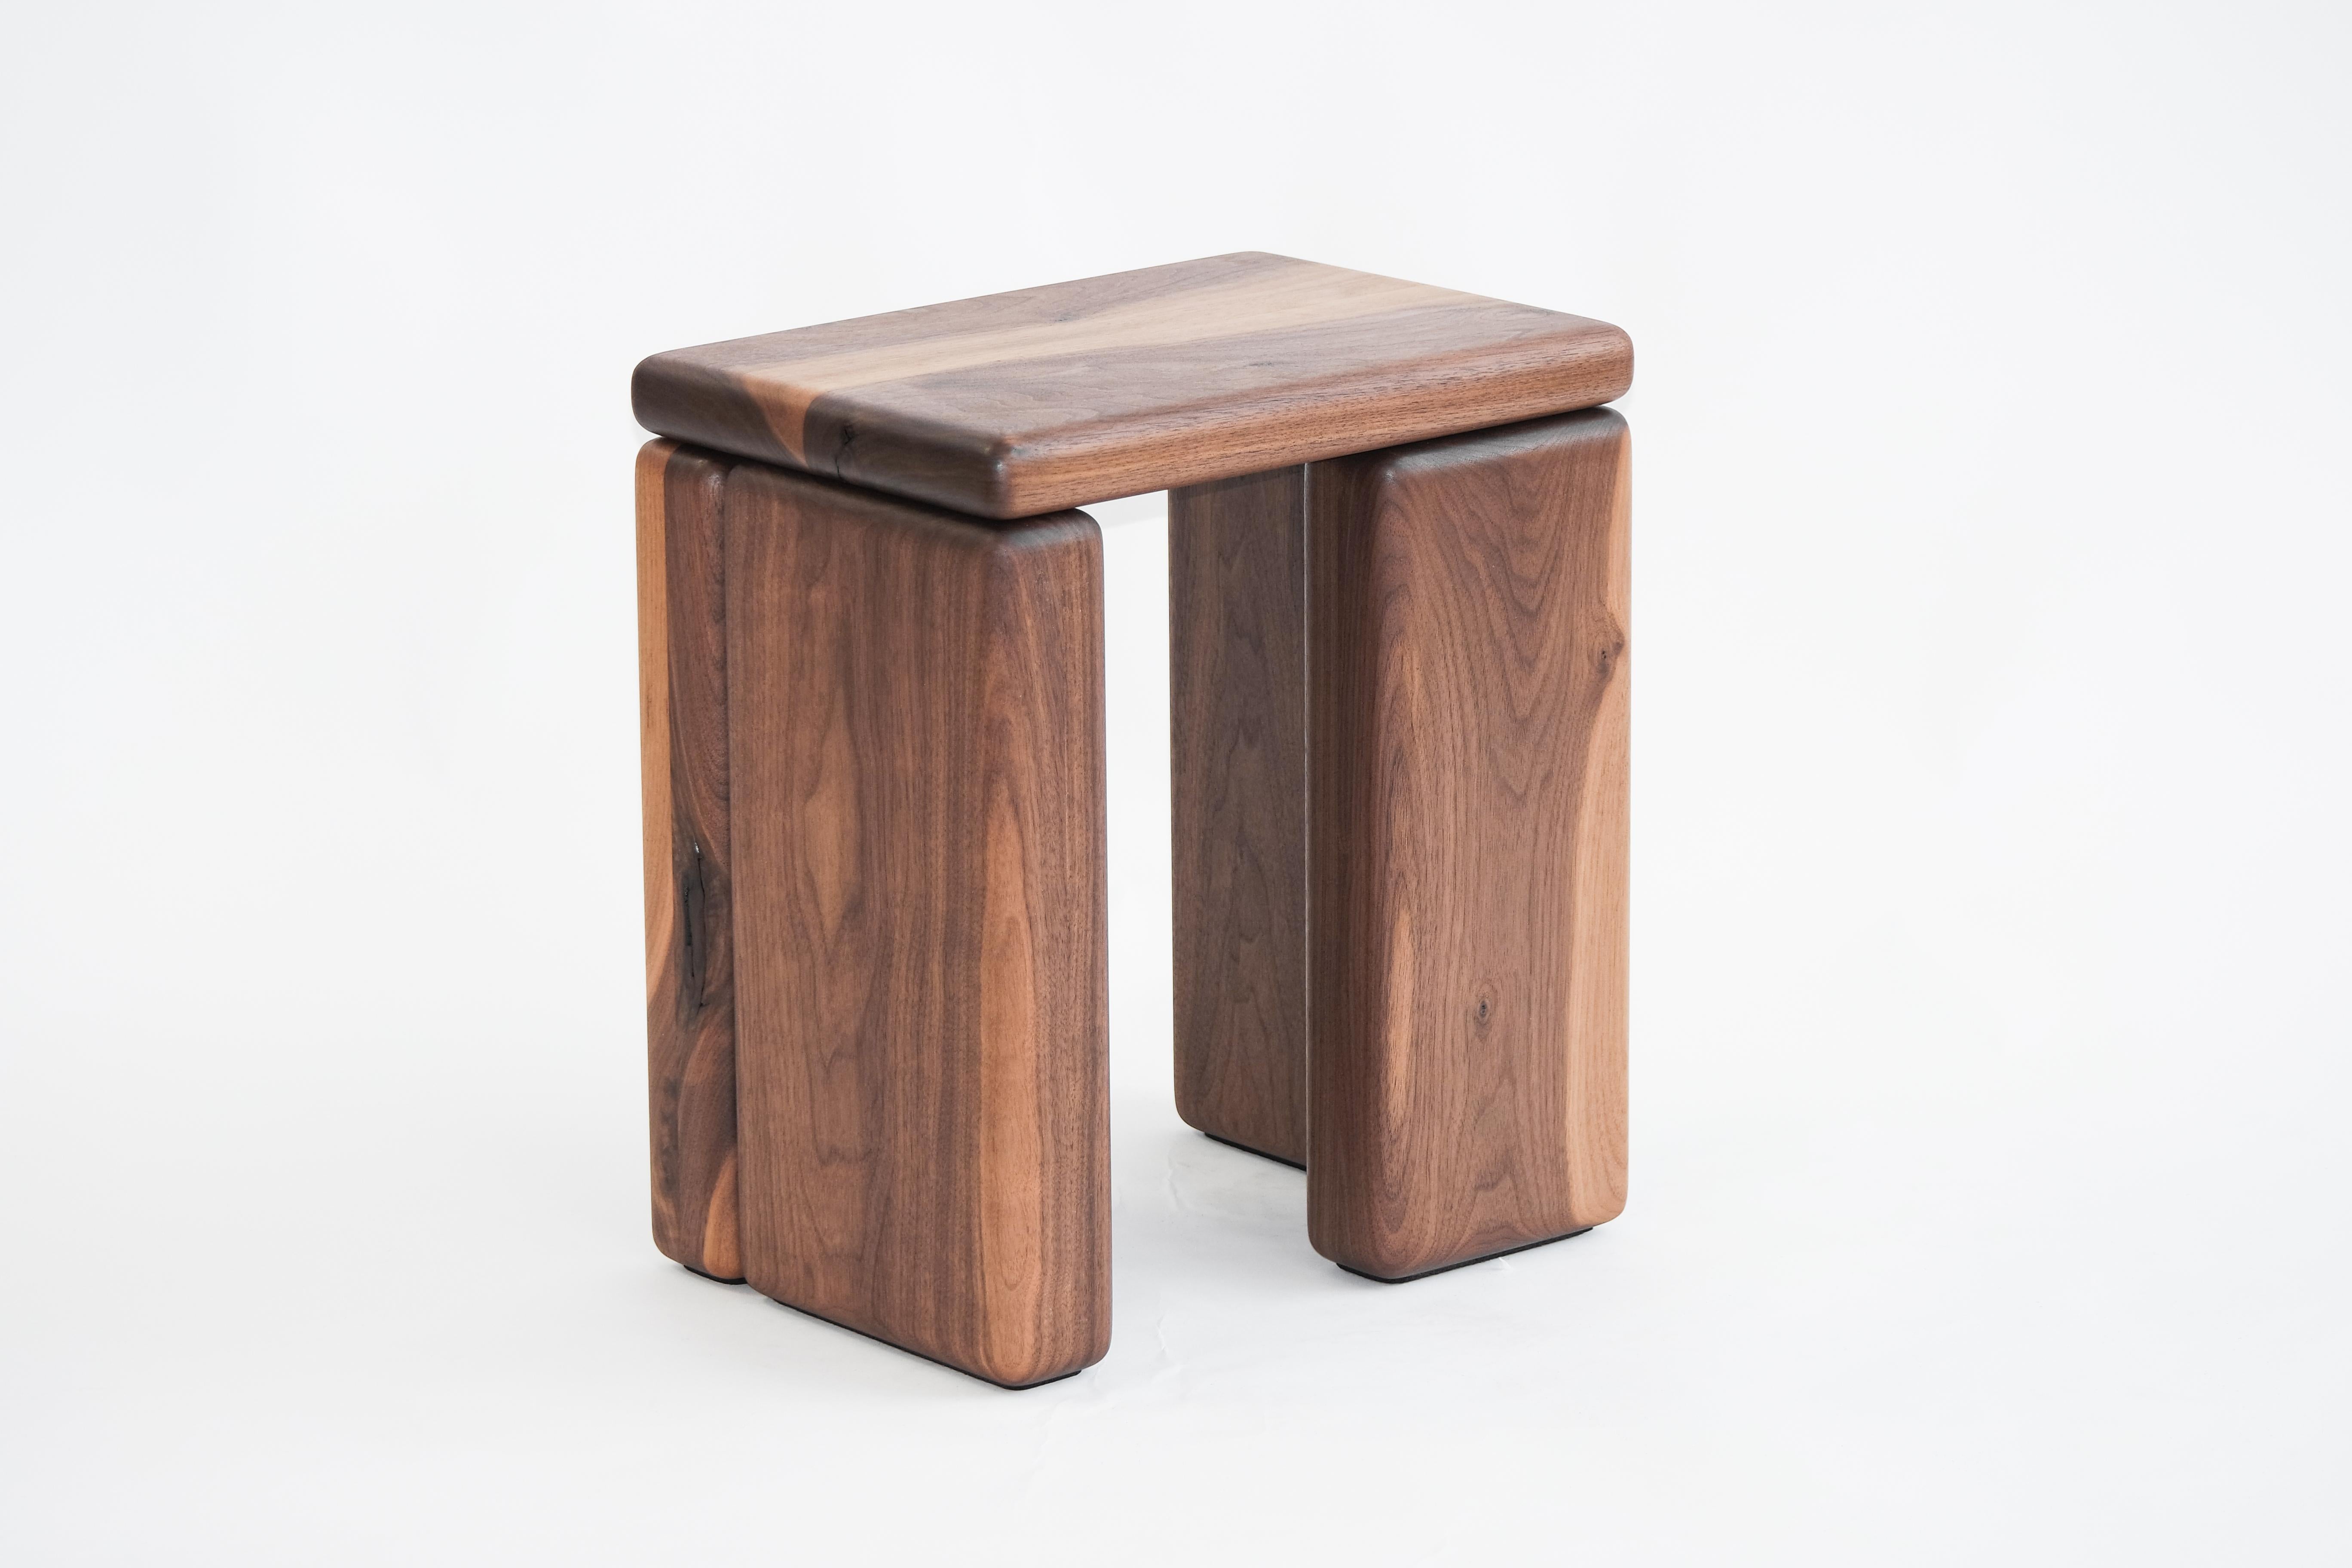 Timber Stool Walnut by Onno Adriaanse
Signed and numbered
Dimensions: D 40 x W 29 x H 45 cm
Materials: Walnut wood, silk-matte oil.
Also available in Color: Indigo blue, purple-red, uncolored wood, Maple, Burned Pine. More colors on request. 

By